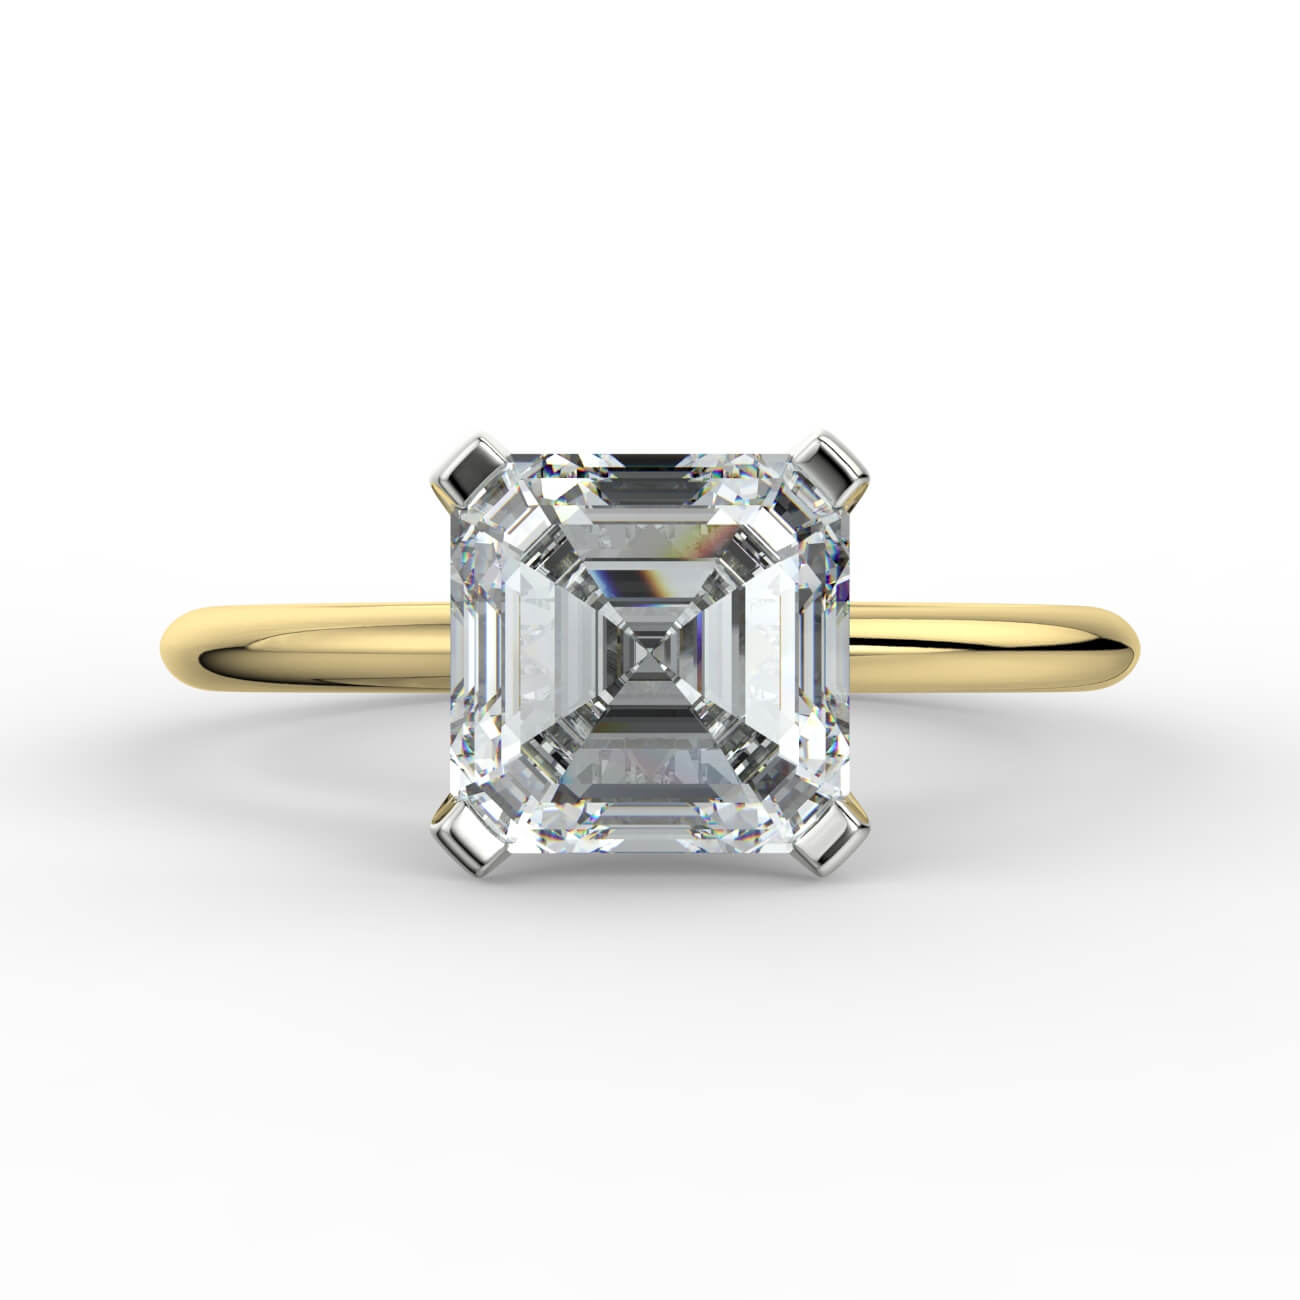 Knife-edge solitaire asscher cut diamond engagement ring in white and yellow gold – Australian Diamond Network